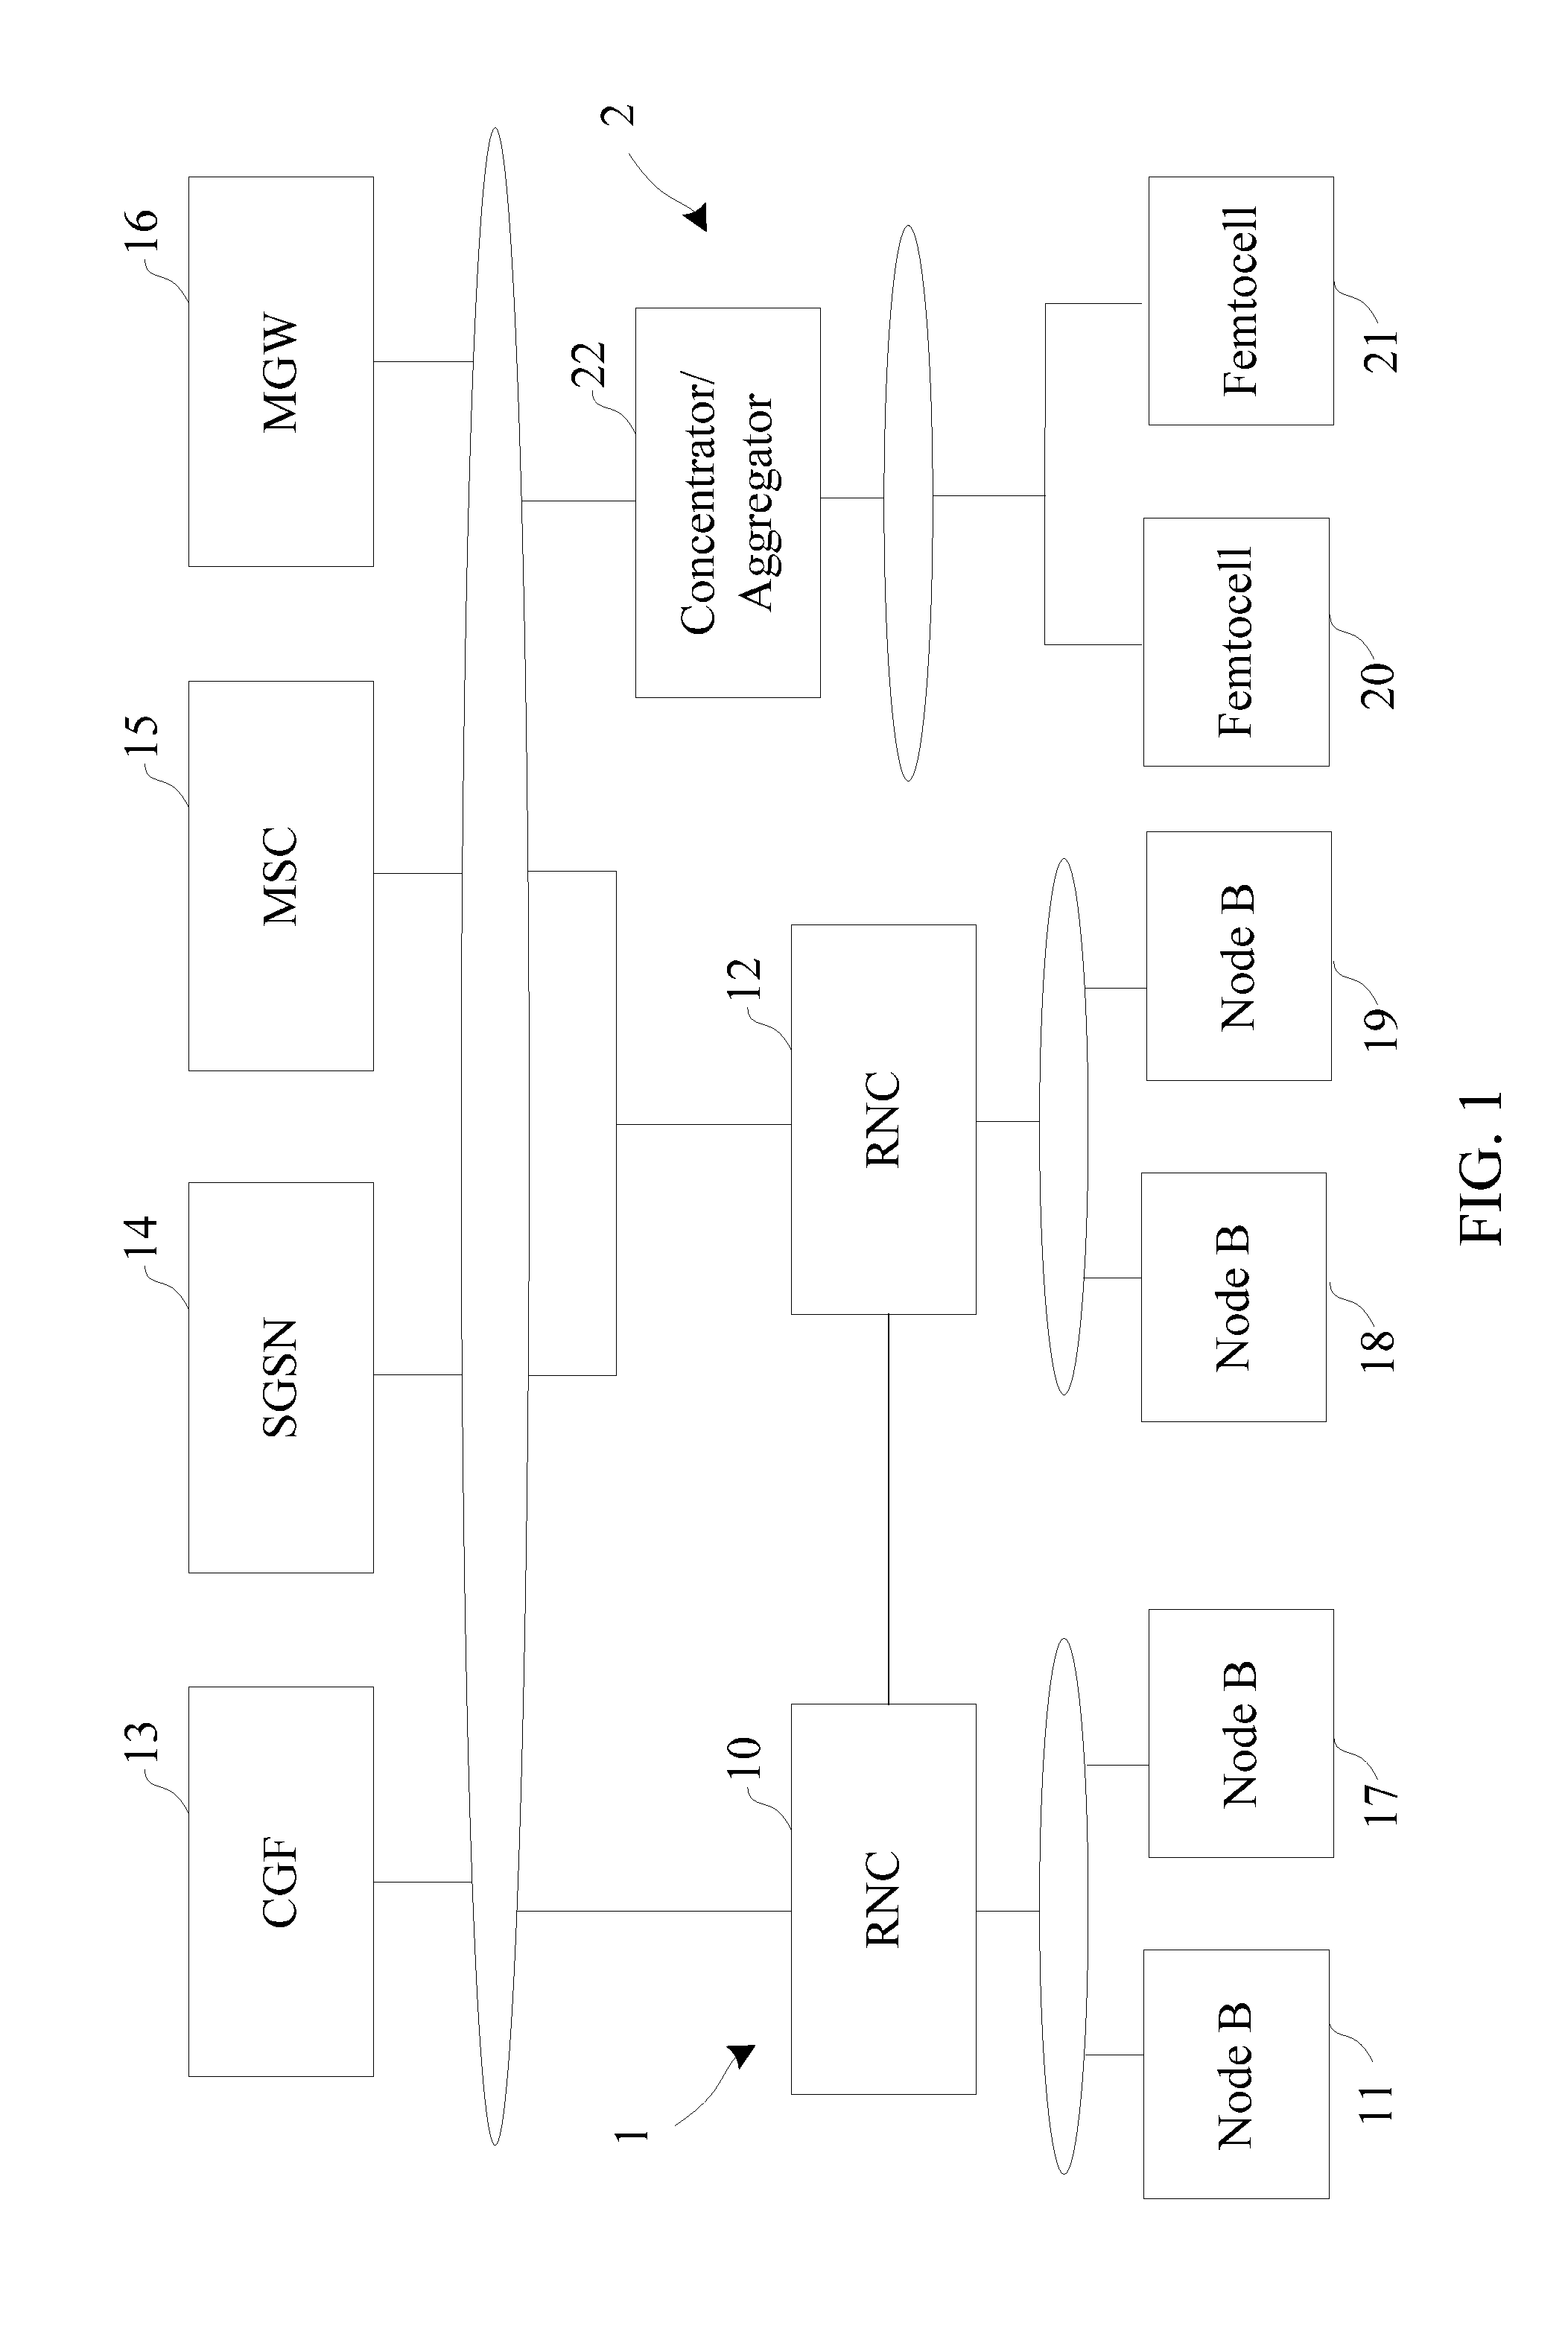 Multi-user, multi-mode baseband signaling methods, timing/frequency synchronization, and receiver architectures